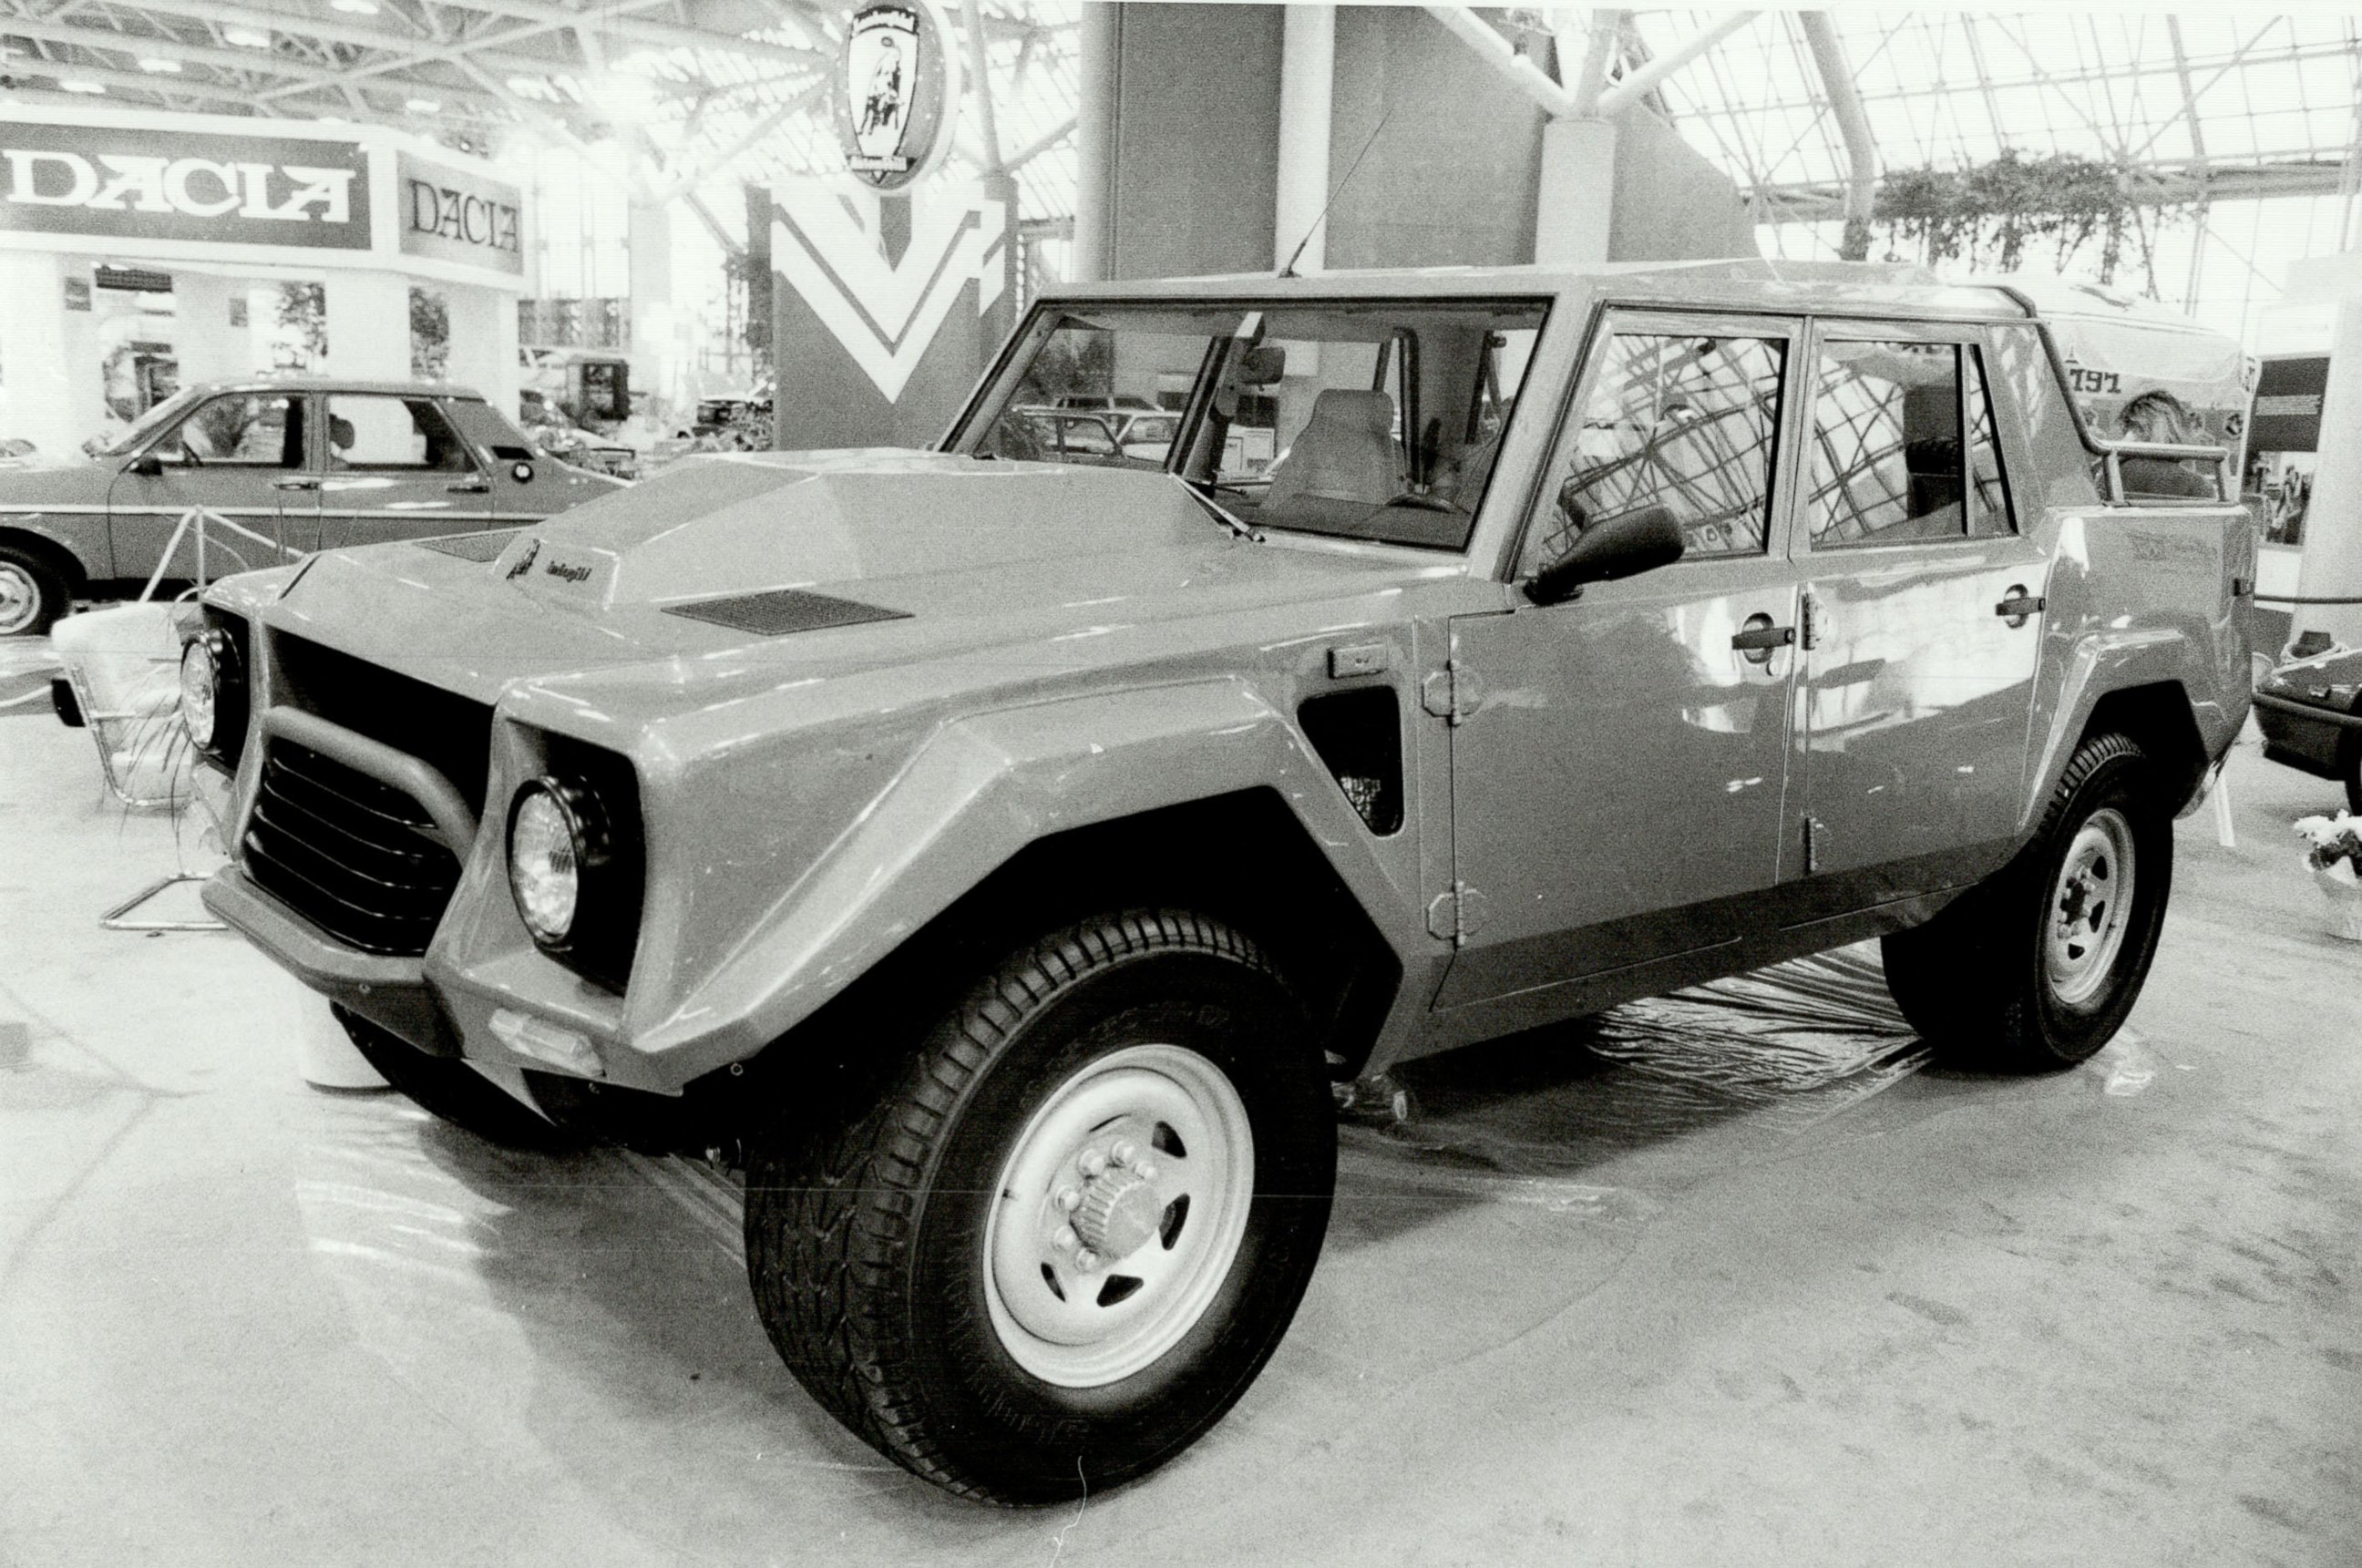 PHOTO: Lamborghini's LM002 seen here in this undated photo.